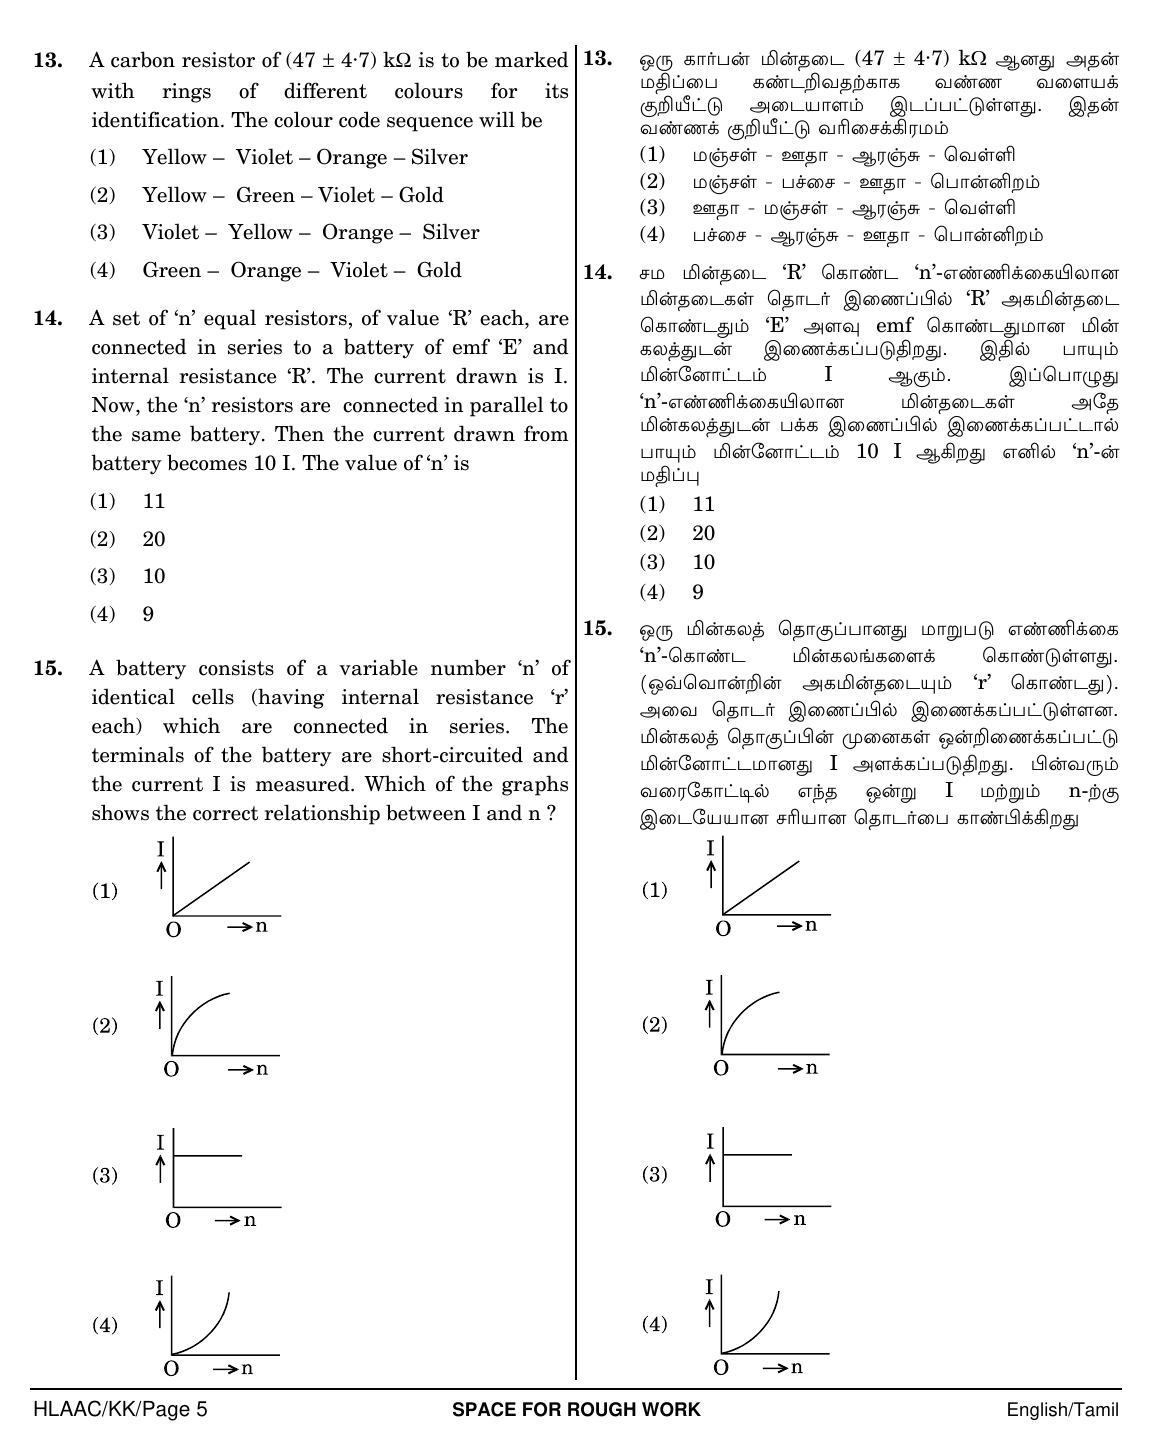 NEET Tamil KK 2018 Question Paper - Page 5